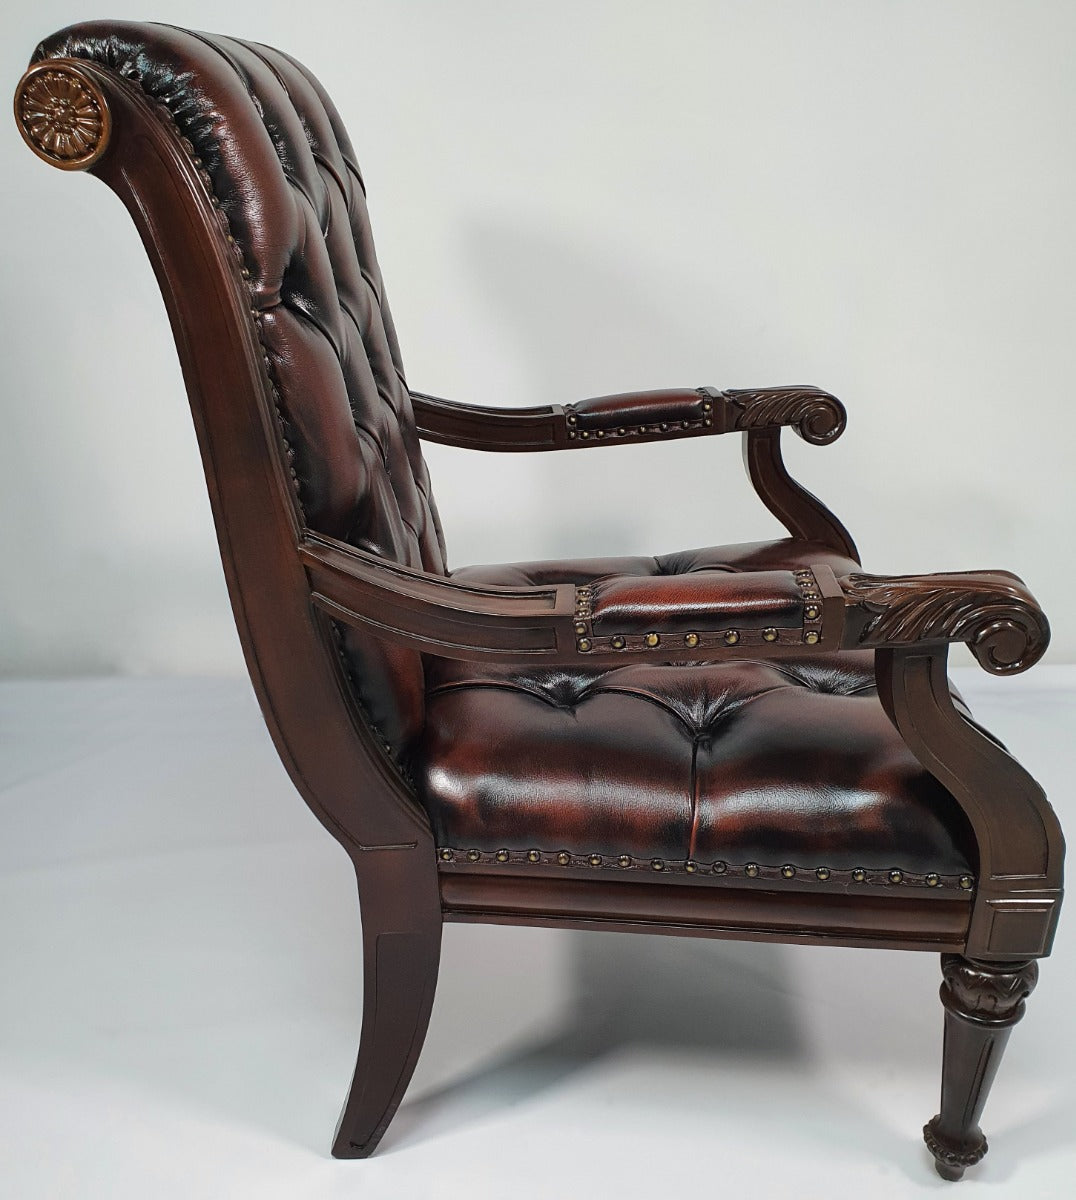 Genuine Brown Leather Traditional Chesterfield Visitor Chair - T212